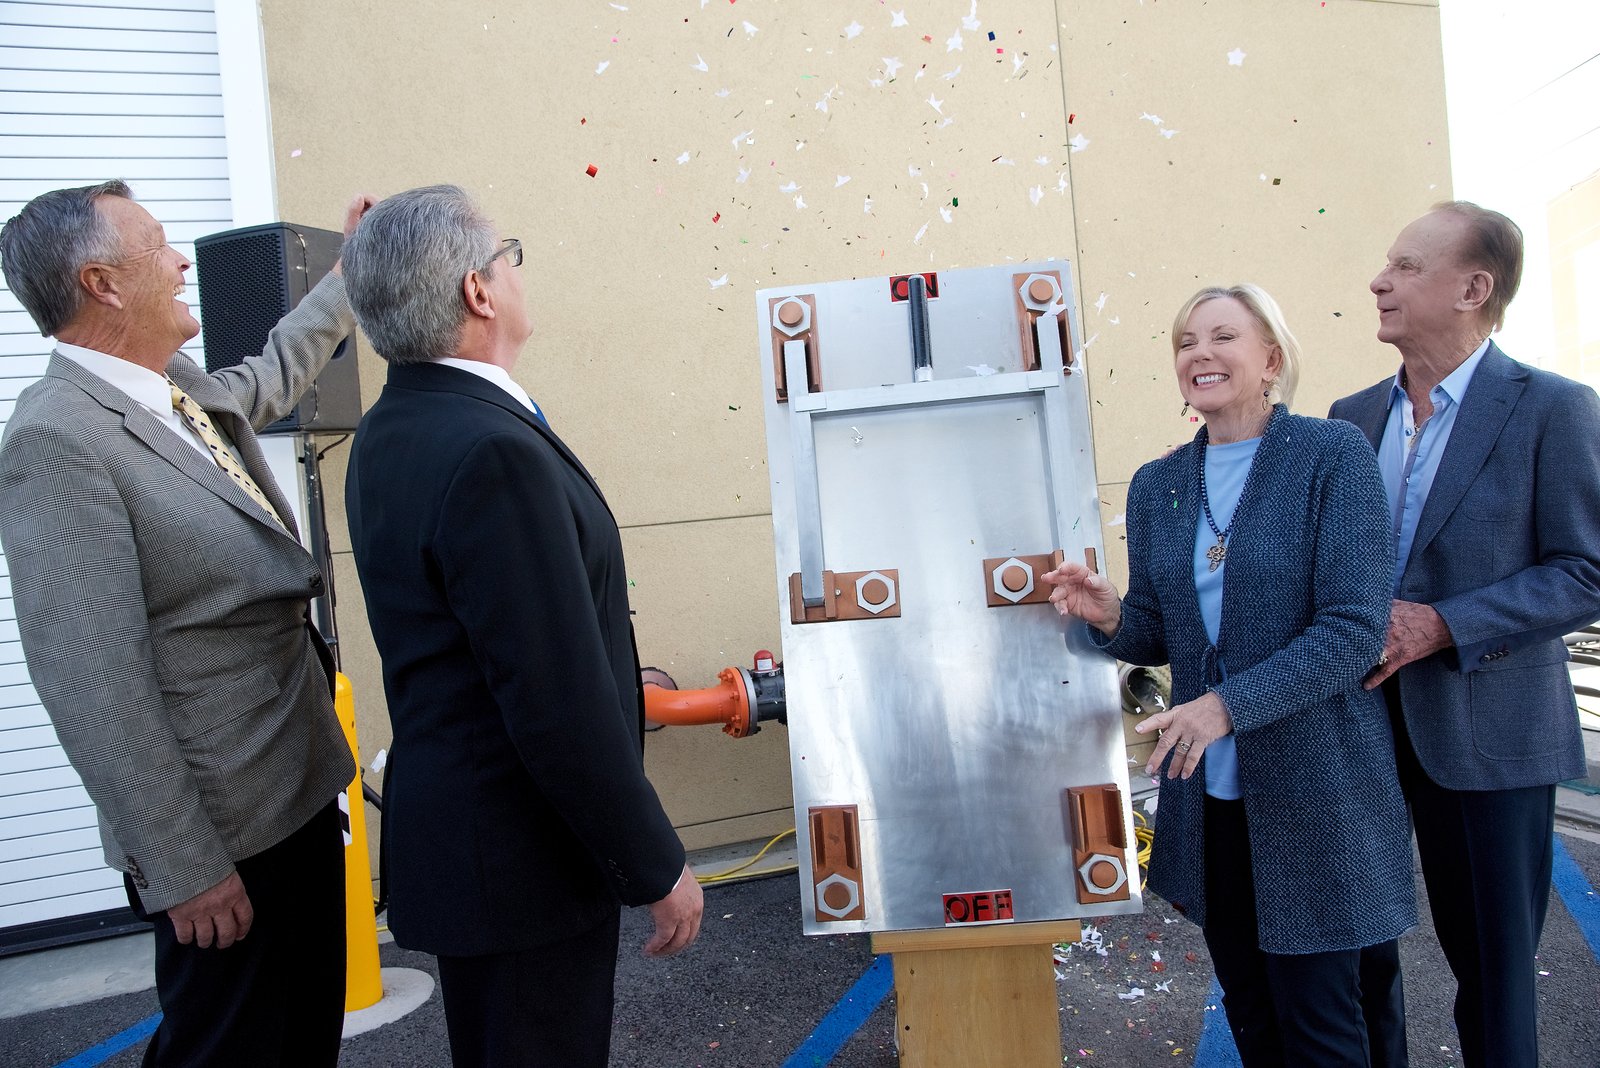 "Flipping the switch" to celebrate the operation of the Central Energy Plant